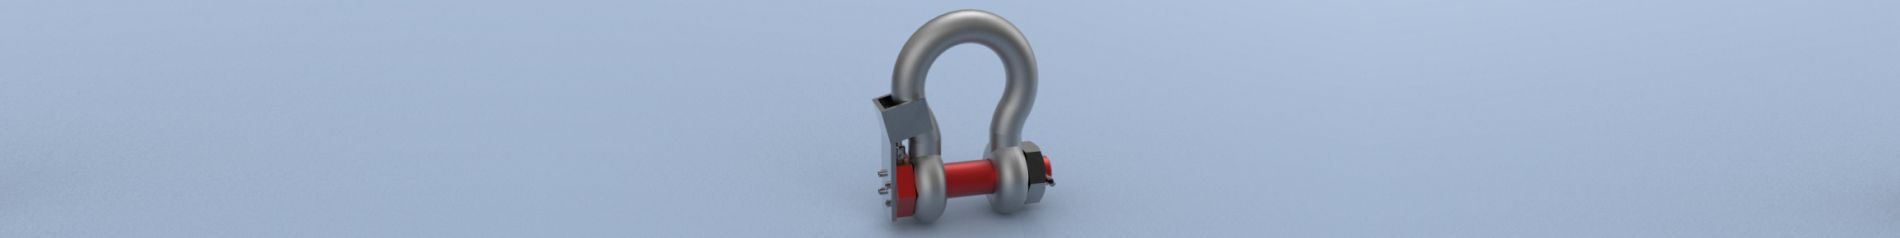 SHK-B Bow Type Cabled Load Shackle